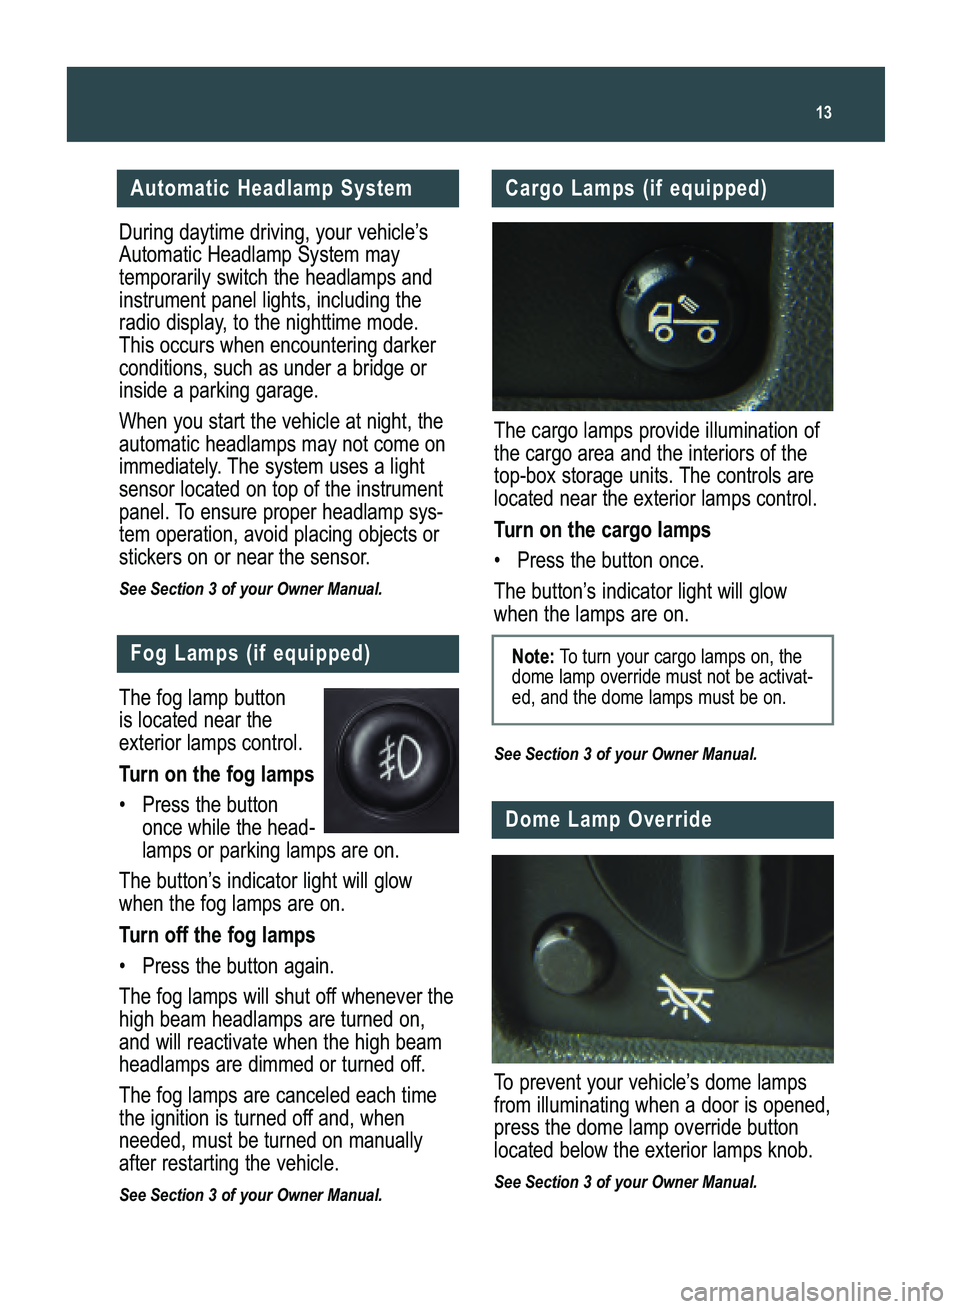 GMC CANYON 2008  Get To Know Guide 13
Automatic Headlamp System
During daytime driving, your vehicle’s
Automatic Headlamp System may temporarily switch the headlamps andinstrument panel lights, including the
radio display, to the nig